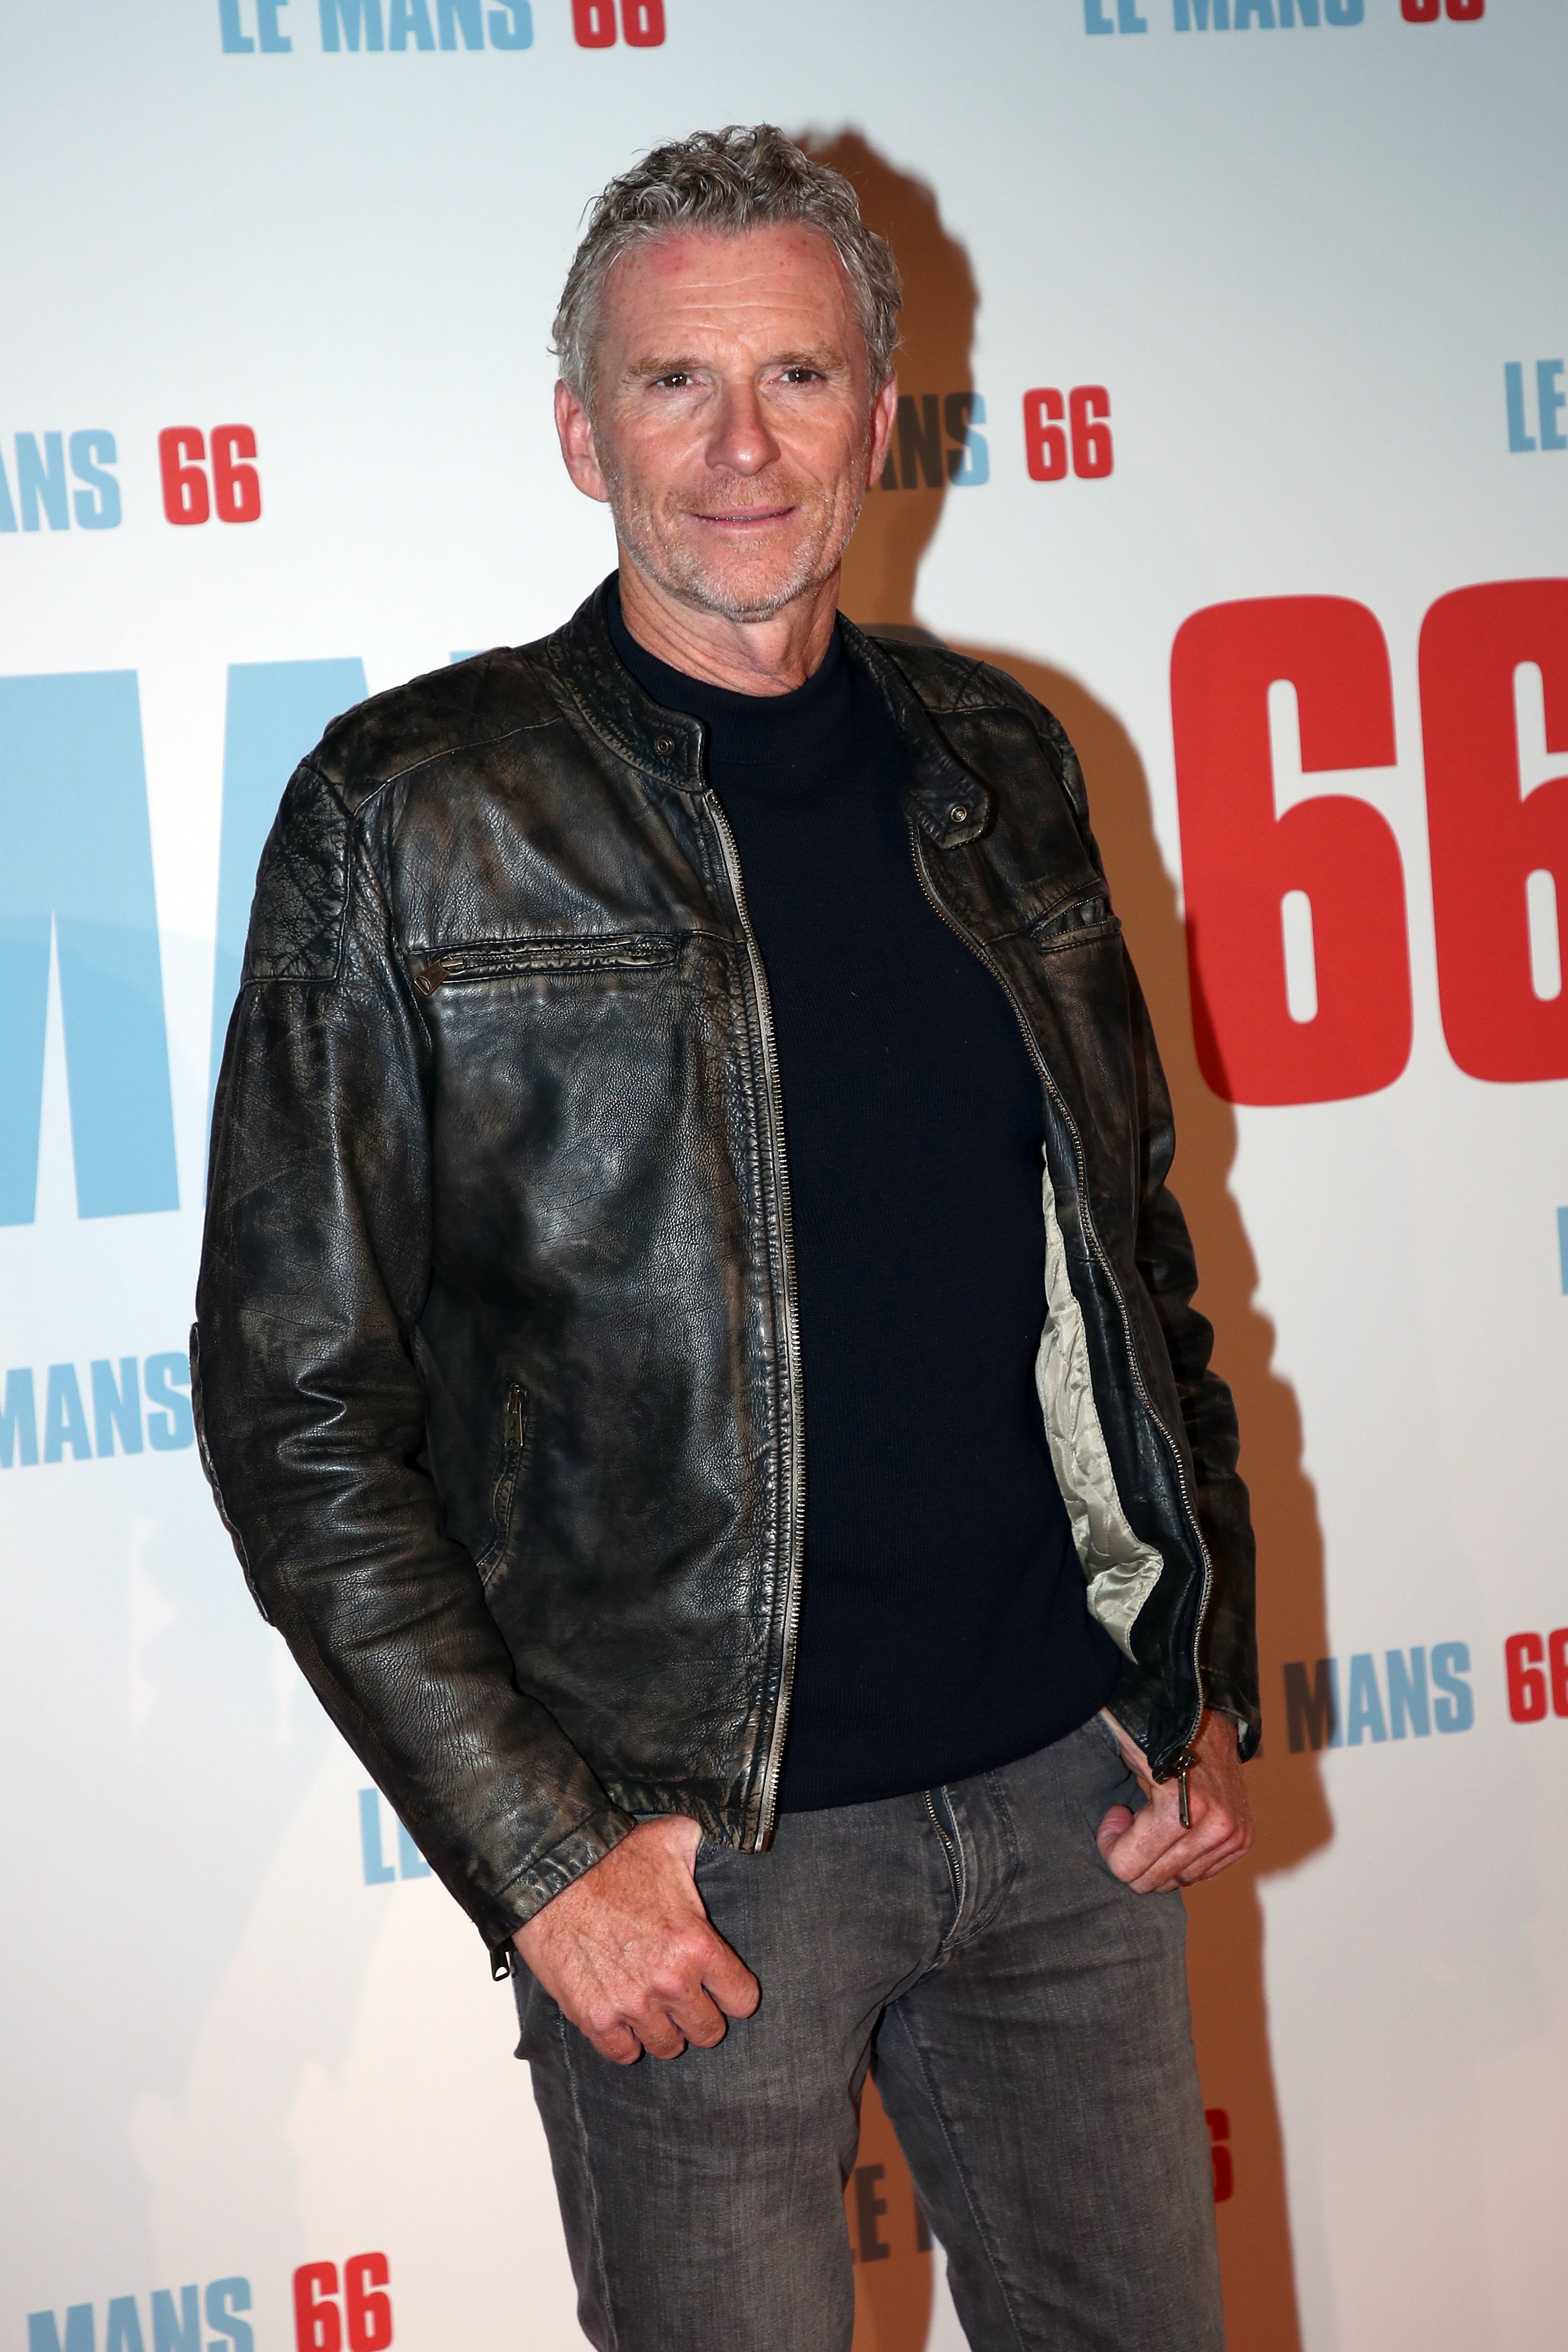 Denis Brogniart watches the premiere of the film 